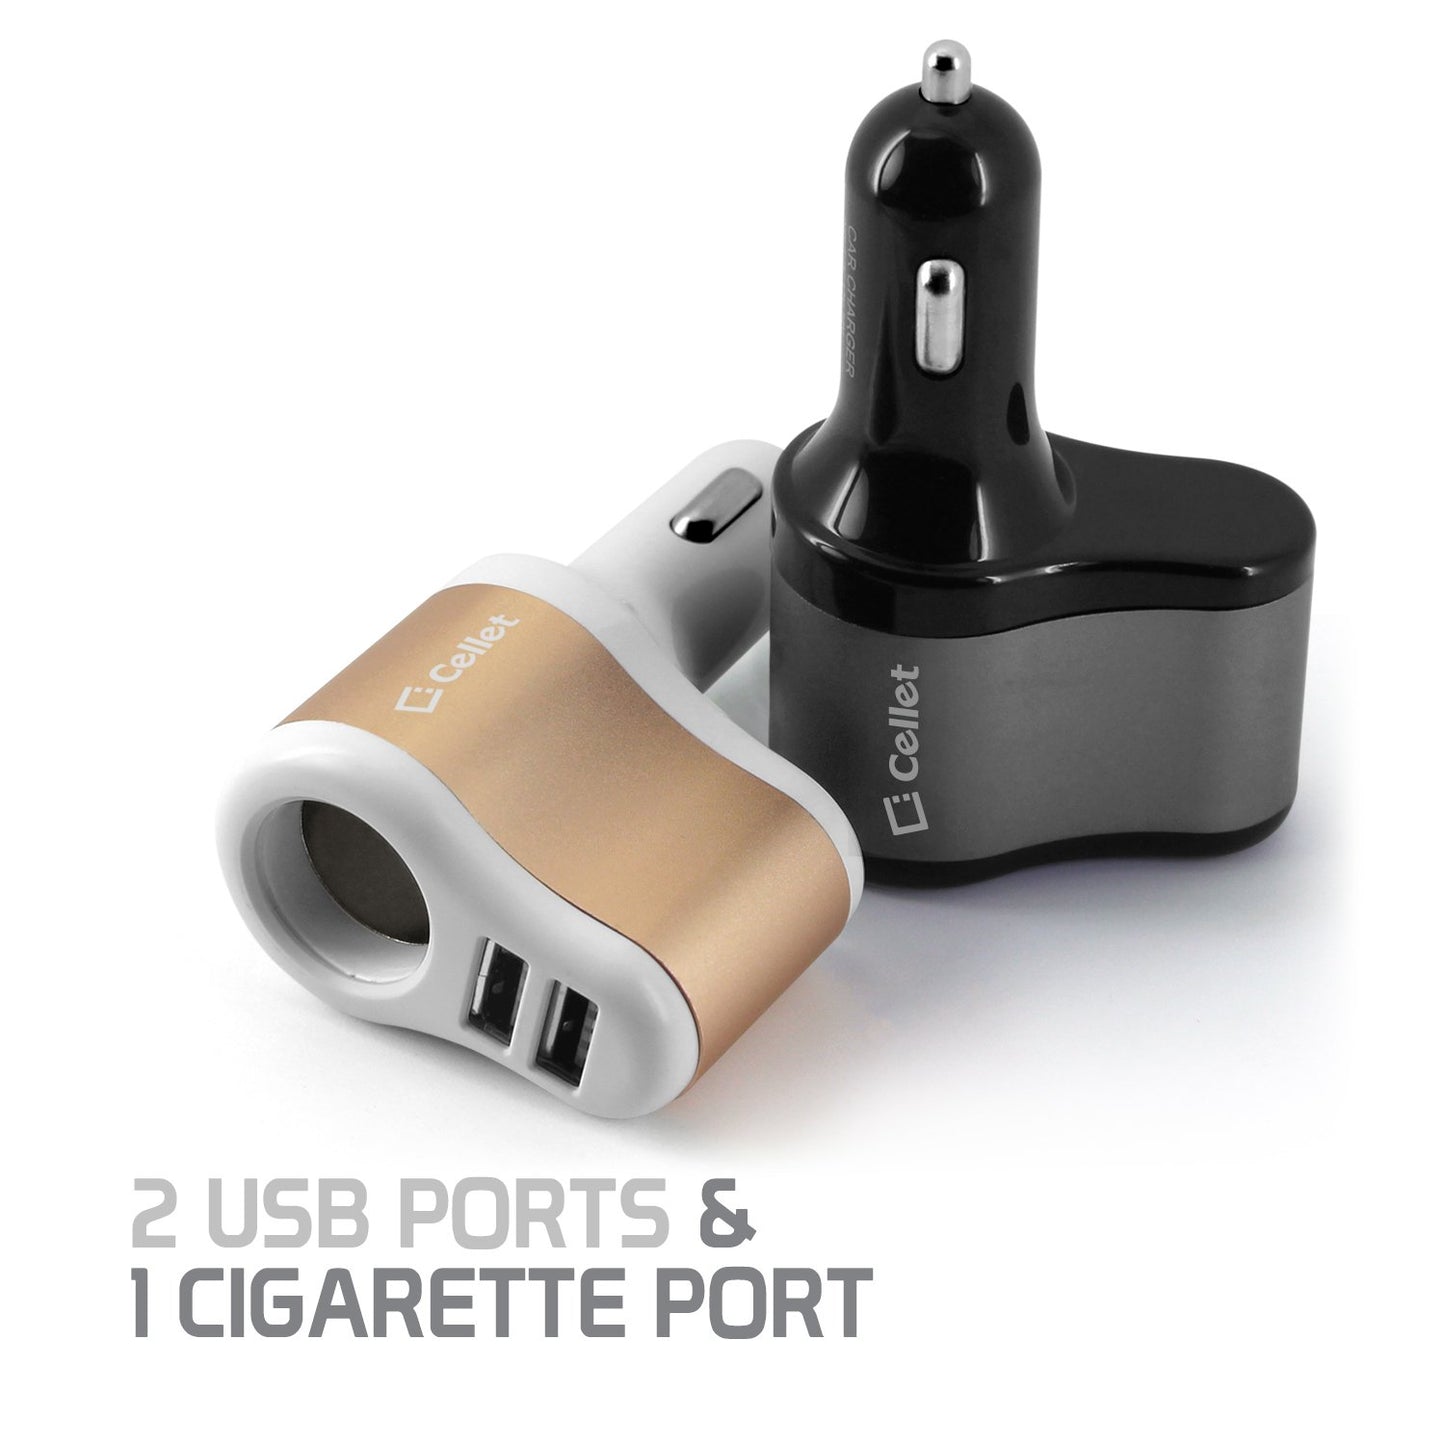 PUSBDC3AWT - Cellet 3 in 1 Car Charger with 2 USB Ports and 1 Car Socket Lighter Adapter - White/Gold